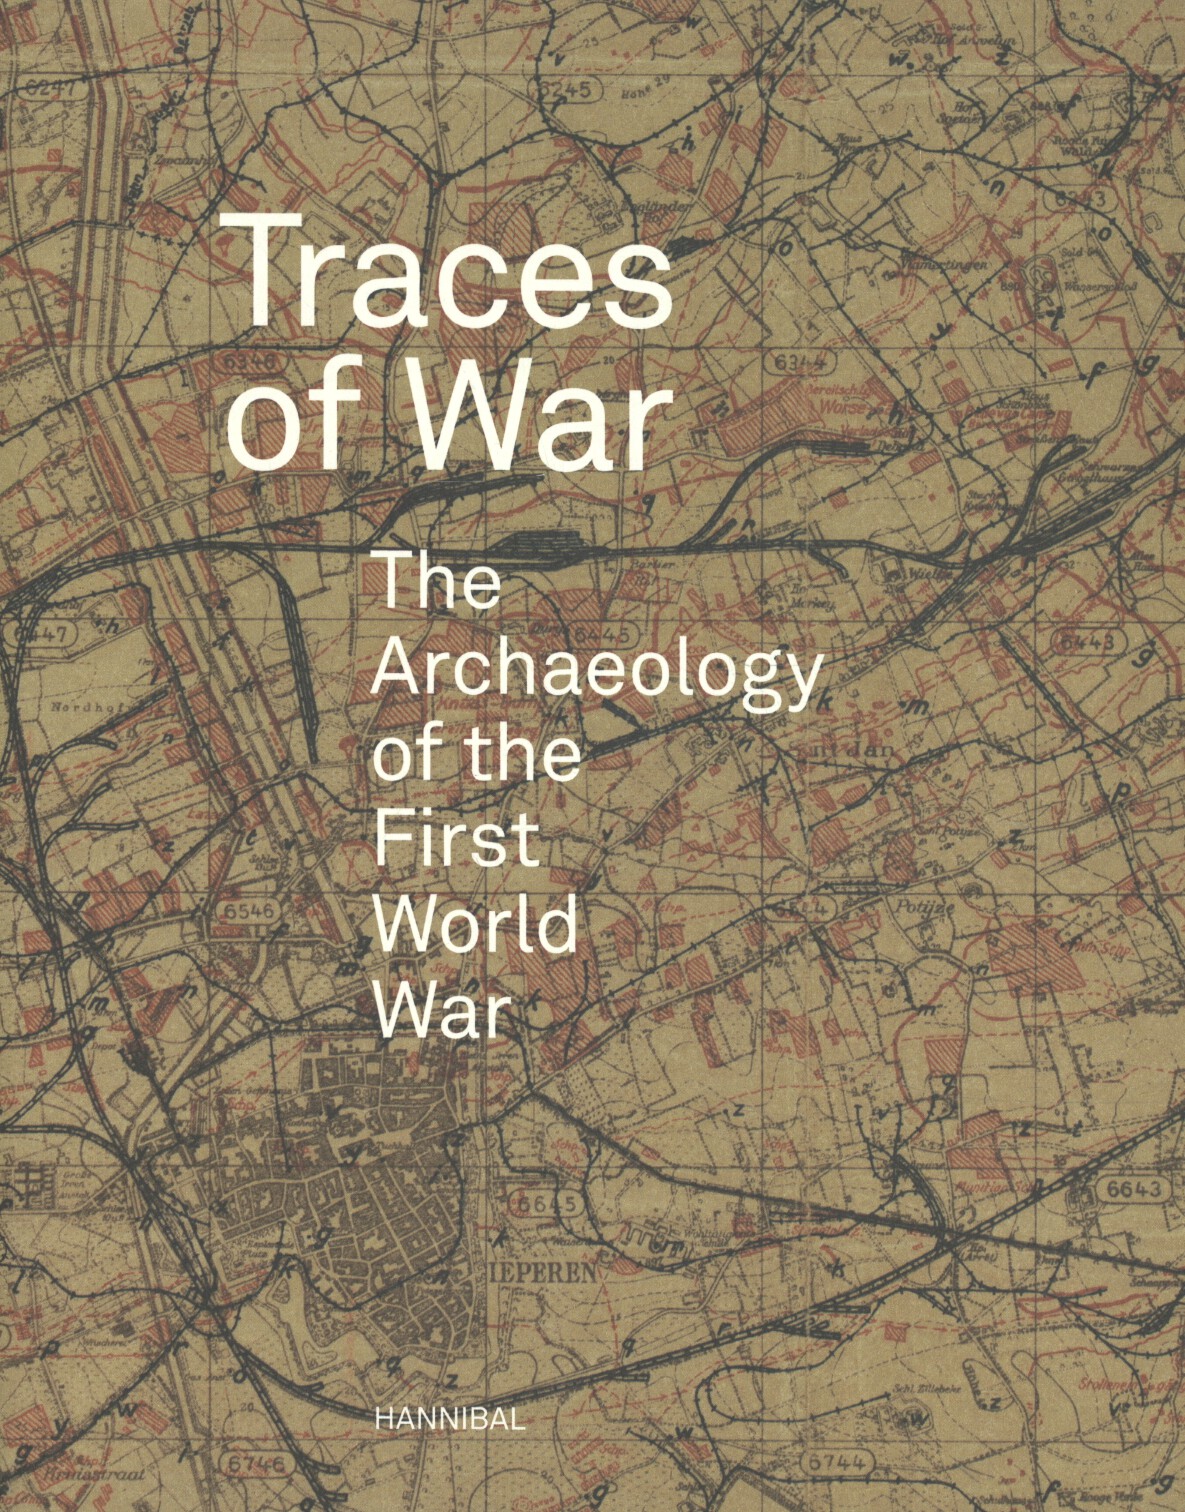 Traces of war